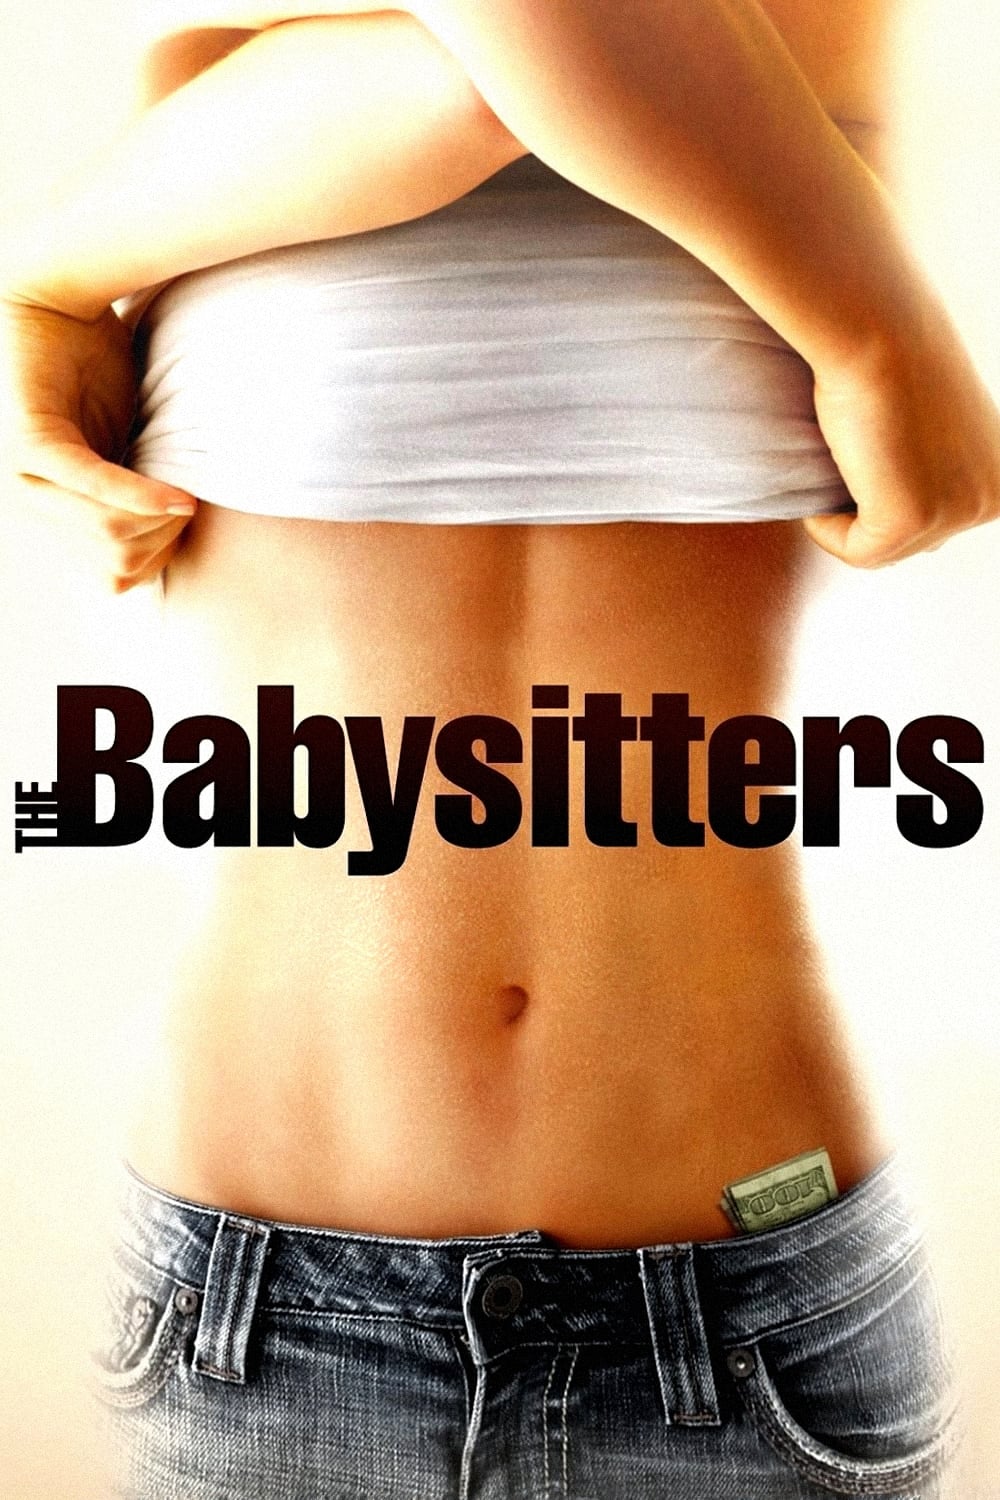 The Babysitters (2008)